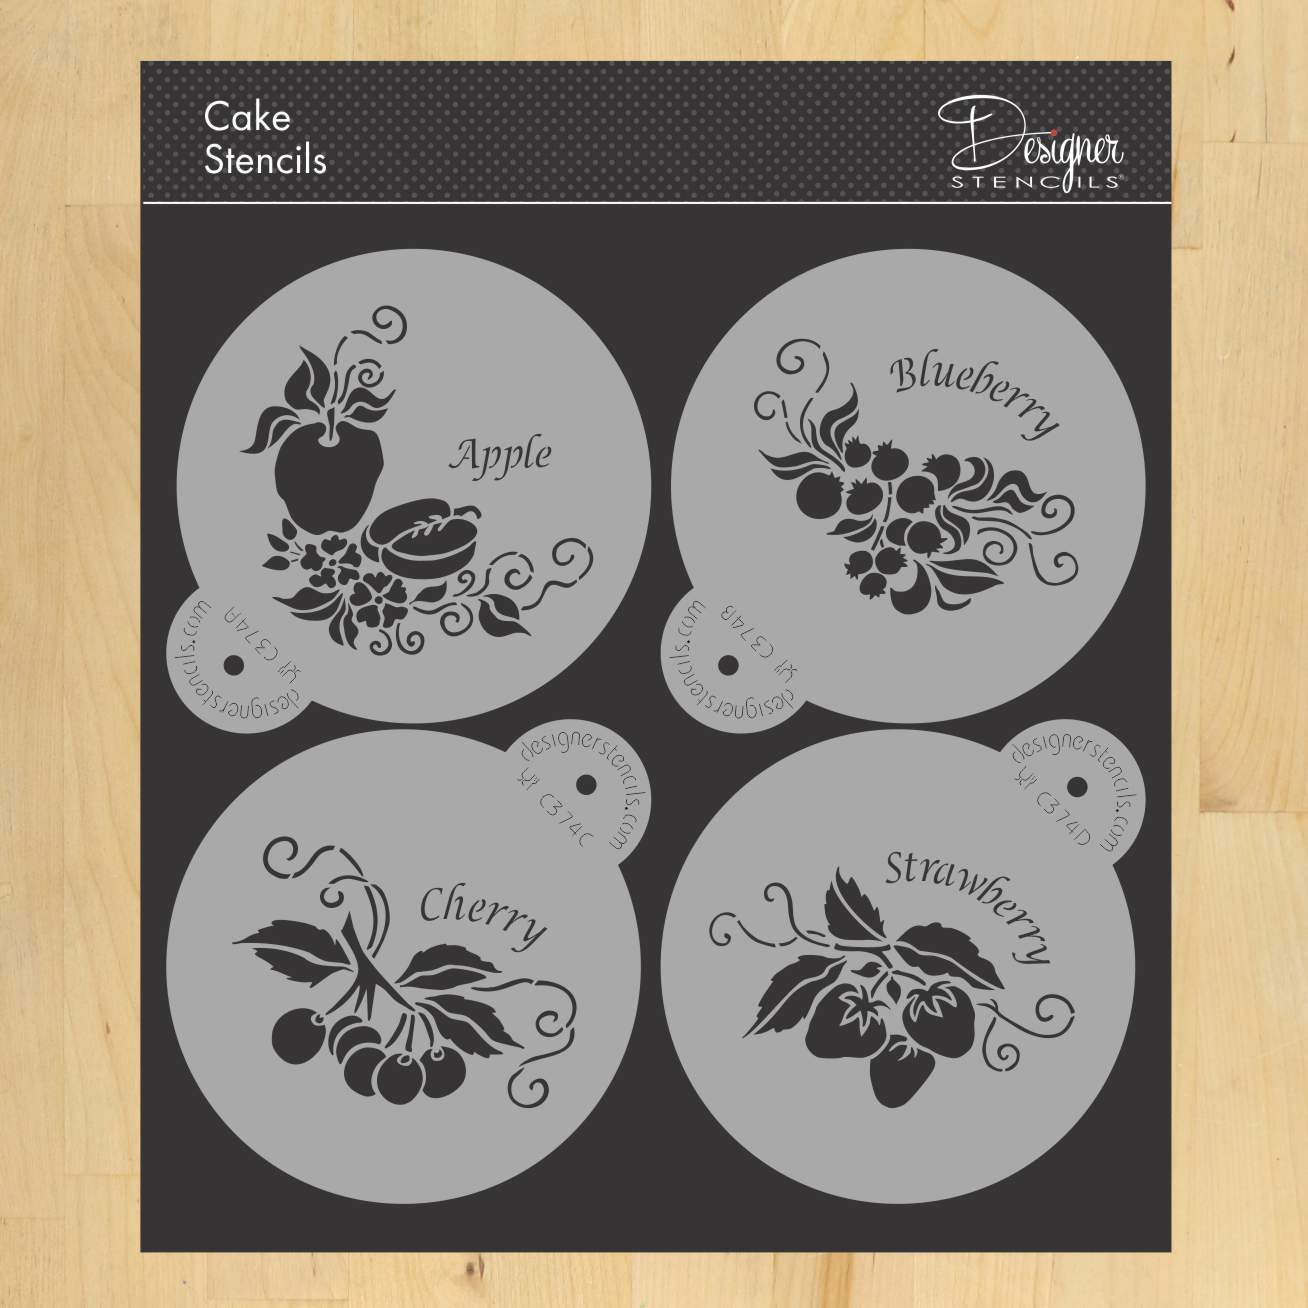 Fruit Toppers Cake and Pie Stencil Set by Designer Stencils